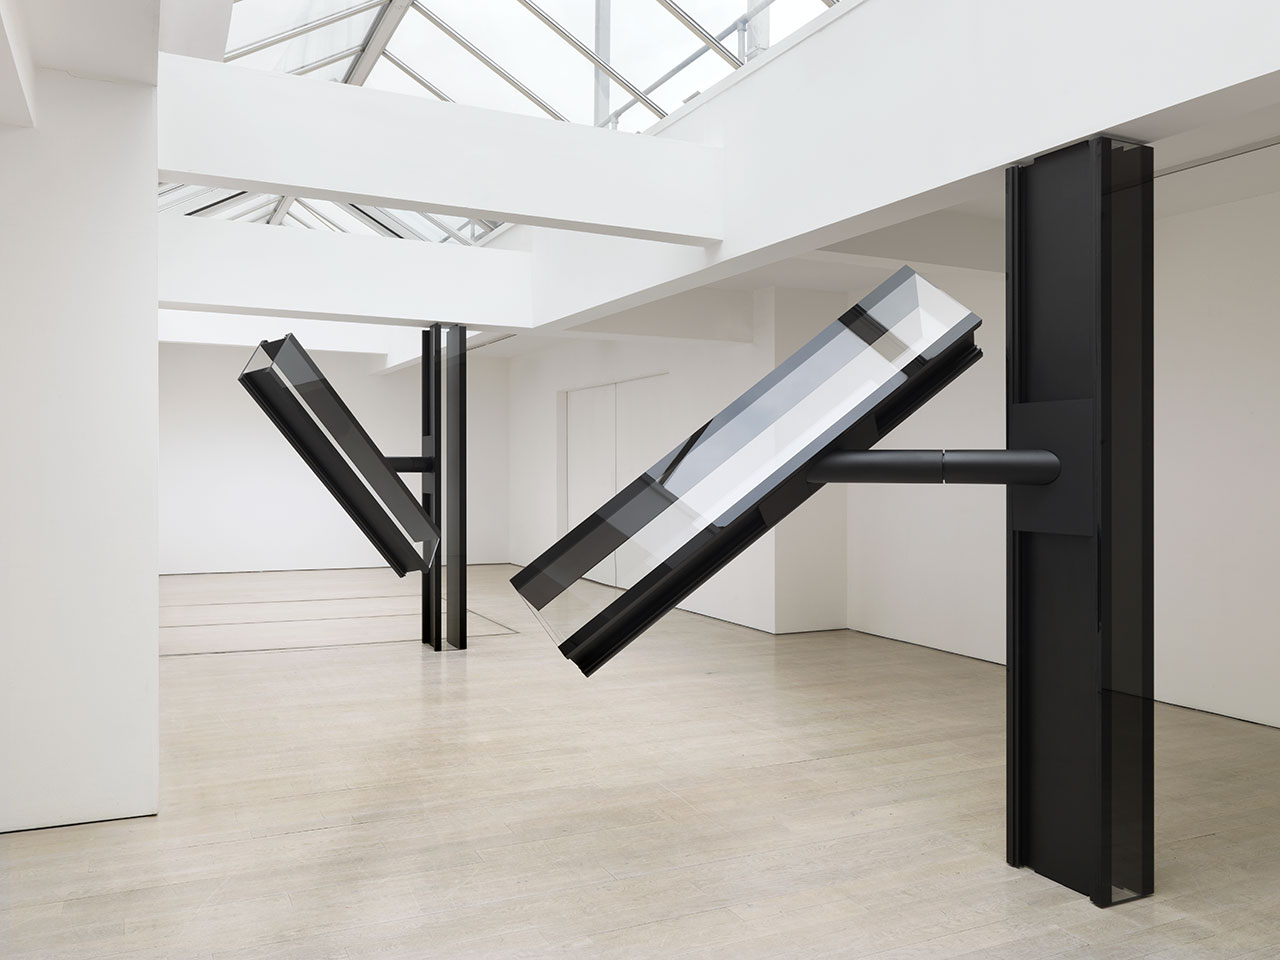 SARAH OPPENHEIMER, S-011110, 2017.Aluminum, steel, glass and existing architecture.Total dimensions variable.Installation view: Annely Juda Fine Arts, London. 2017. Photo Credit: Serge Hasenböhler